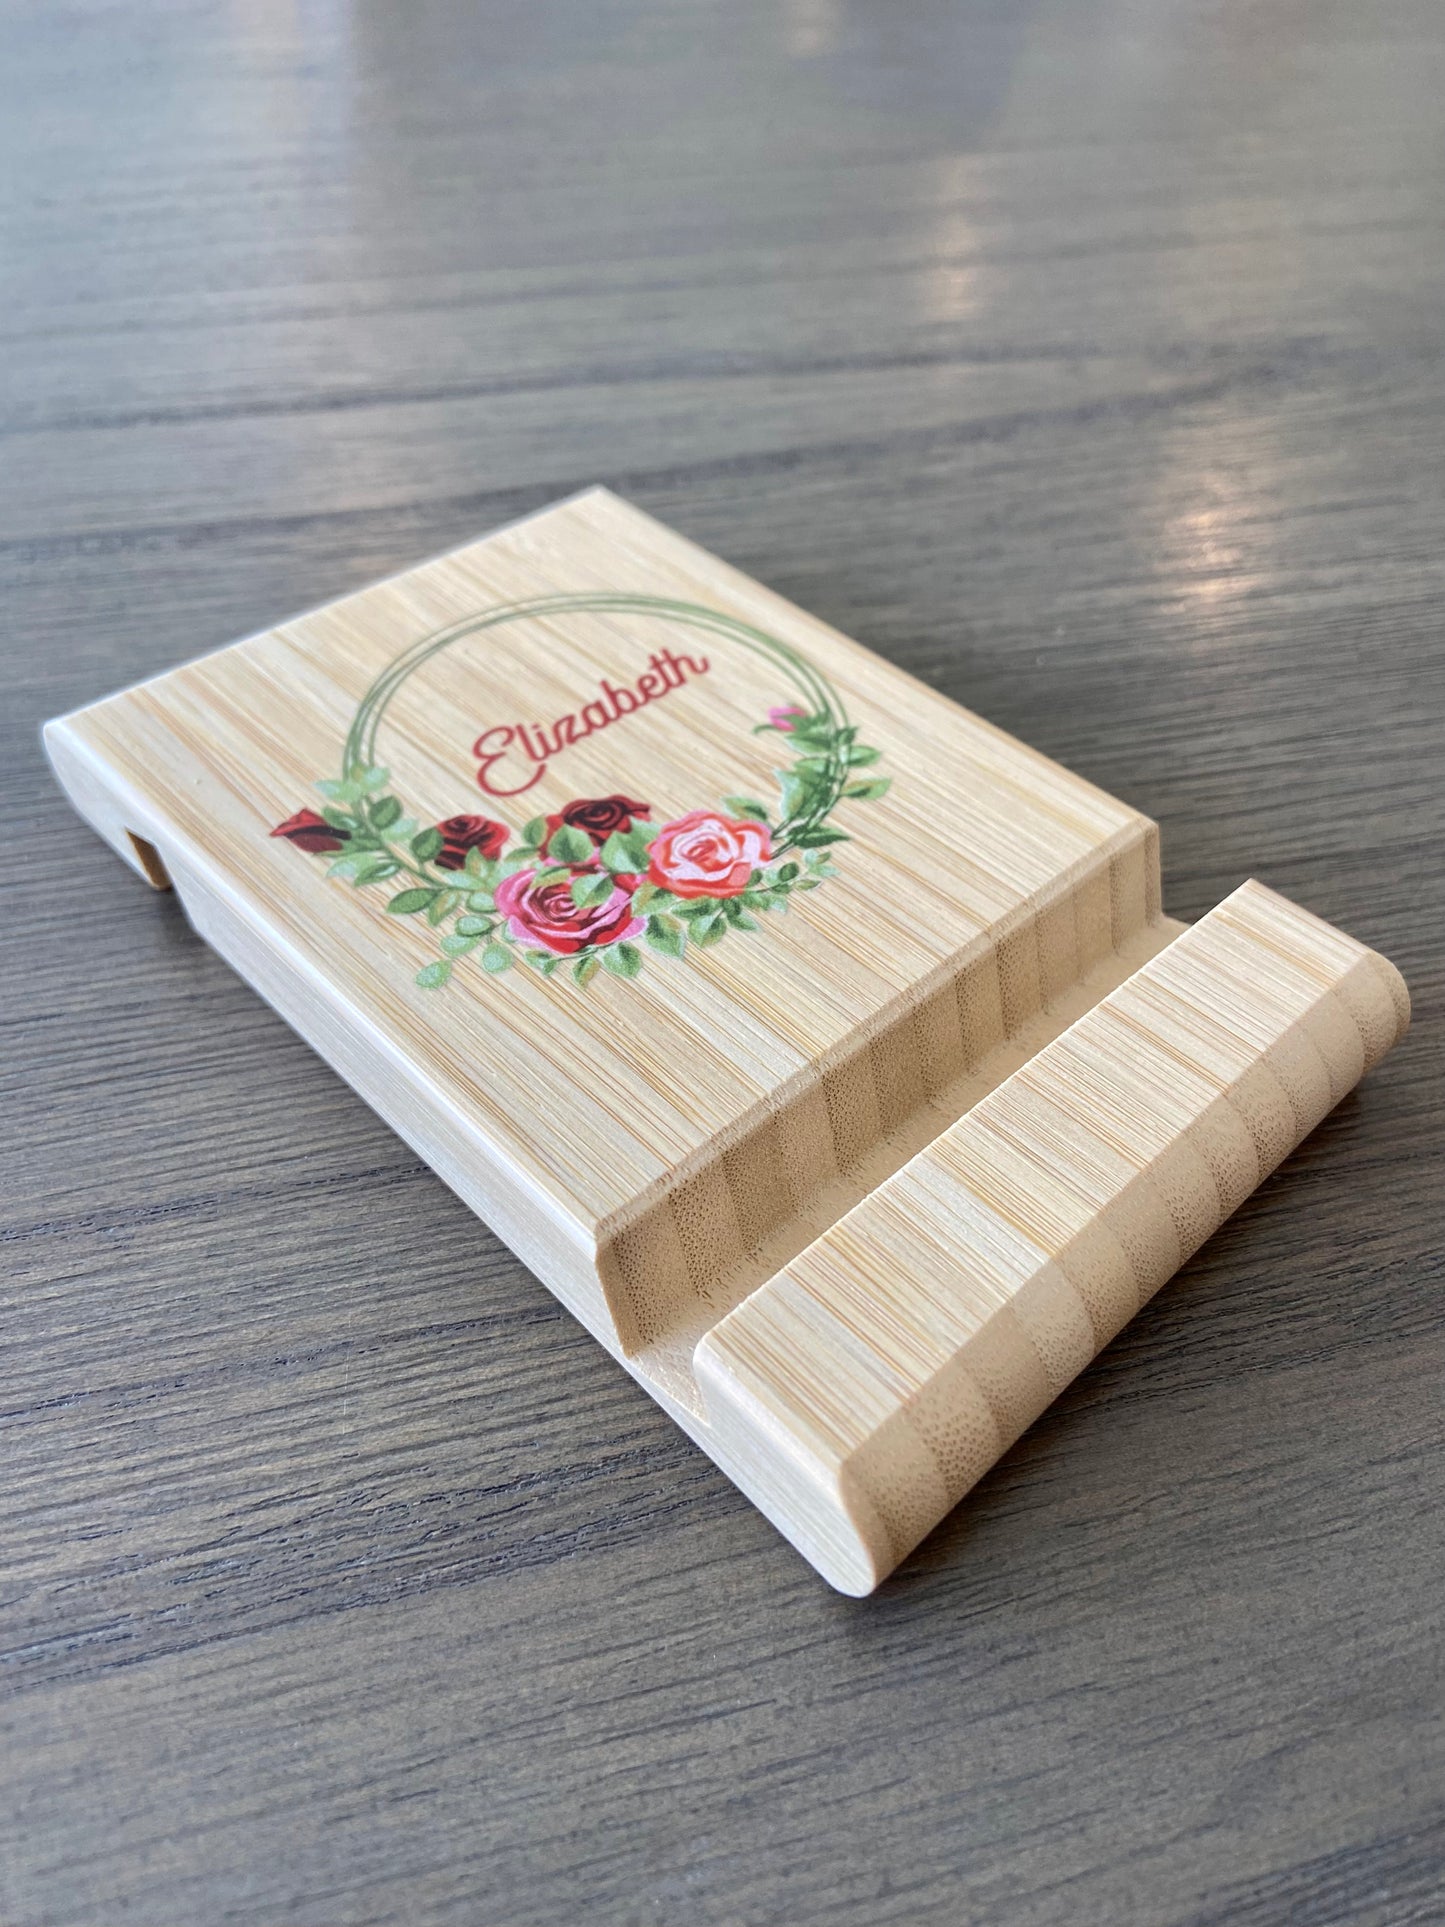 Personalized Cellphone and Tablet Holder